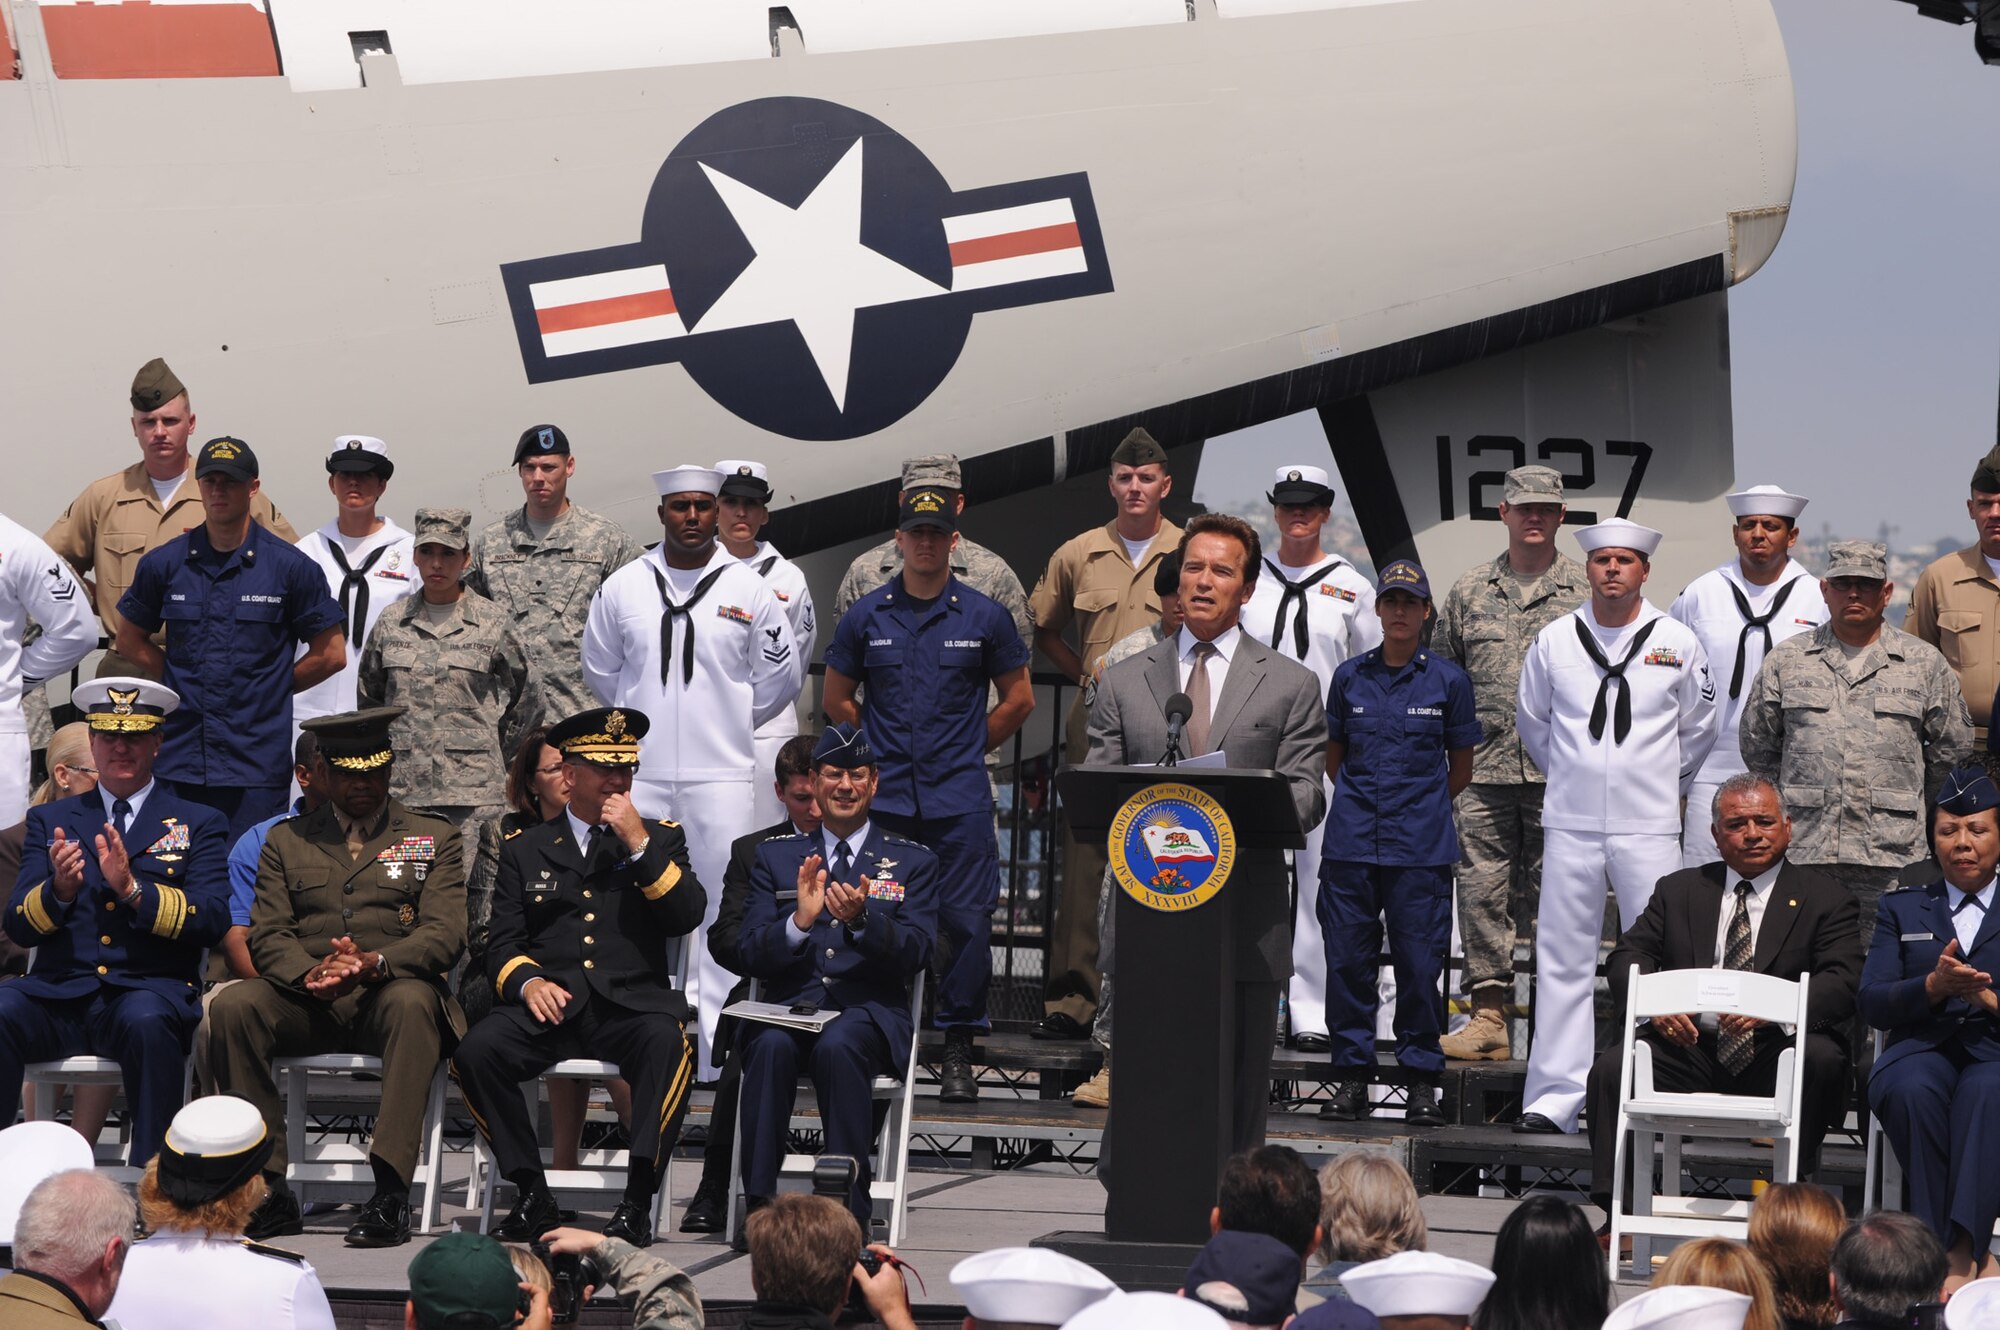 California Governor Arnold Schwarzenegger (center) delivers a speech surrounded by Lt. Gen. John “Tom” Sheridan (left), Space and Missile Systems Center commander, other flag officers and service members, and state cabinet members at the Operation Welcome Home kick-off aboard the U.S.S. Midway in San Diego, June 3.  The mission of California’s Operation Welcome Home is to directly connect with the 30,000 veterans annually returning to California so they can access the benefits they have earned and the services that can help them transition successfully from military service to civilian life.  Governor Schwarzenegger has targeted $20 million to hire 325 people to directly reach out and connect with combat veterans.   (Photo by Joe Juarez)  